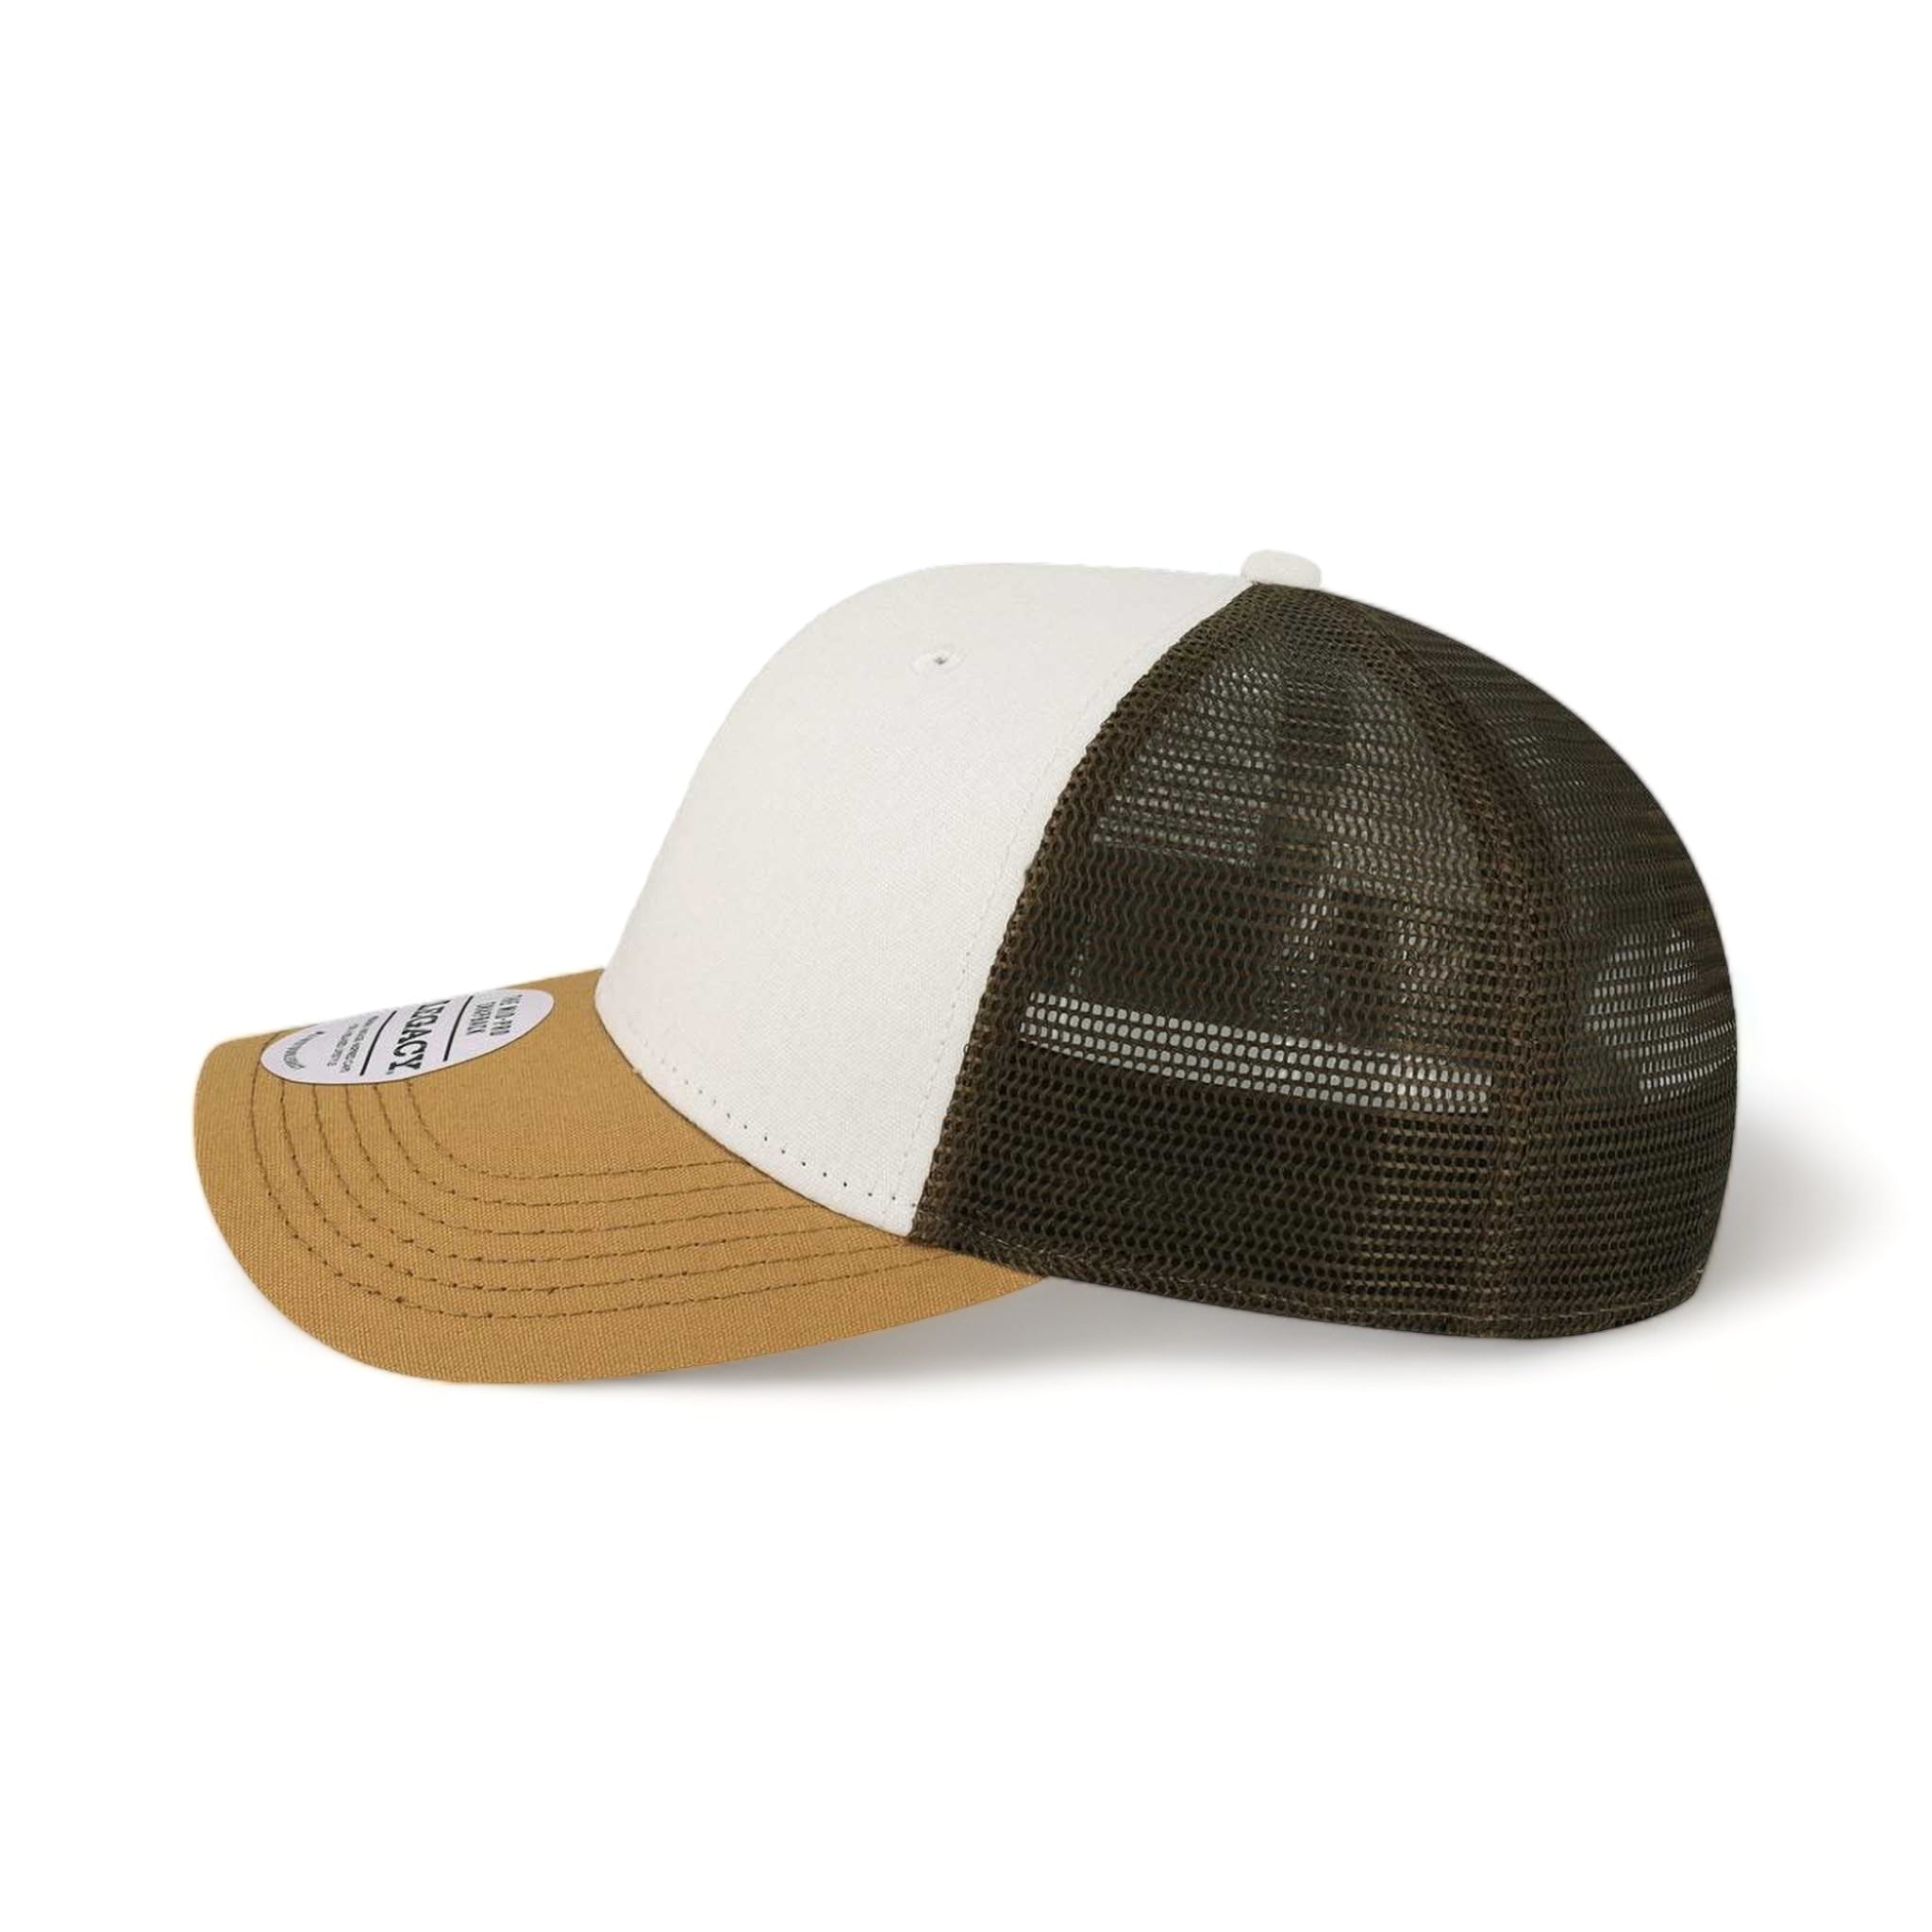 Side view of LEGACY MPS custom hat in white, caramel and brown